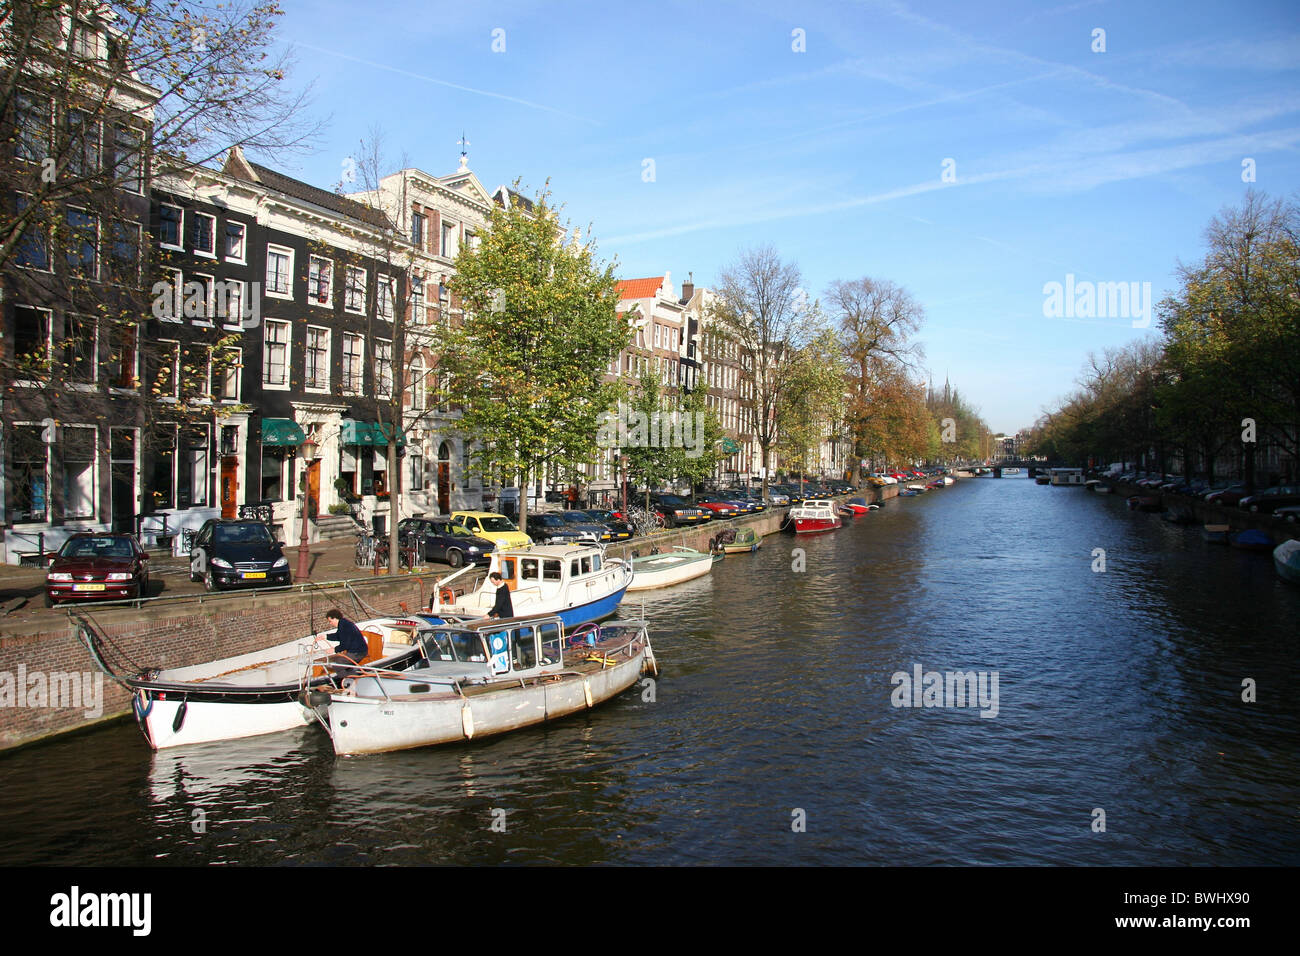 Holland Netherlands Holland Europe Amsterdam Gracht canal canal boats water row of houses shore trees Stock Photo